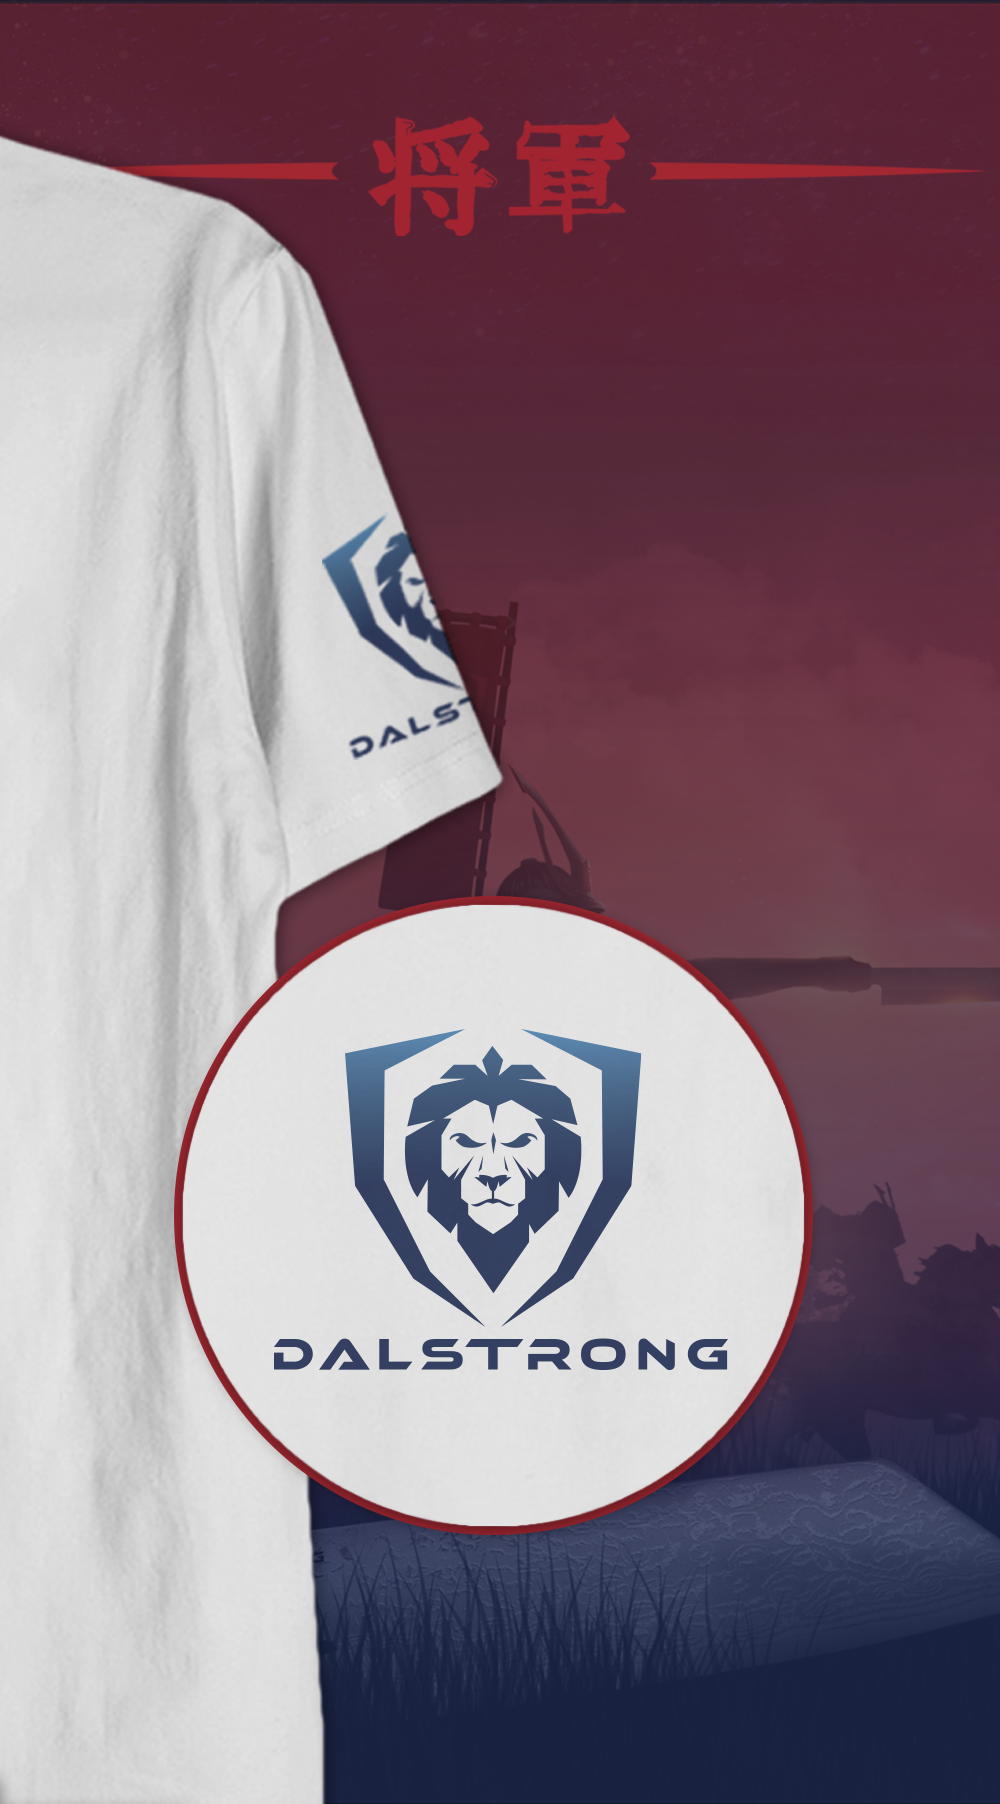 Dalstrong the shogun series blades up tee white with dalstrong name and logo.